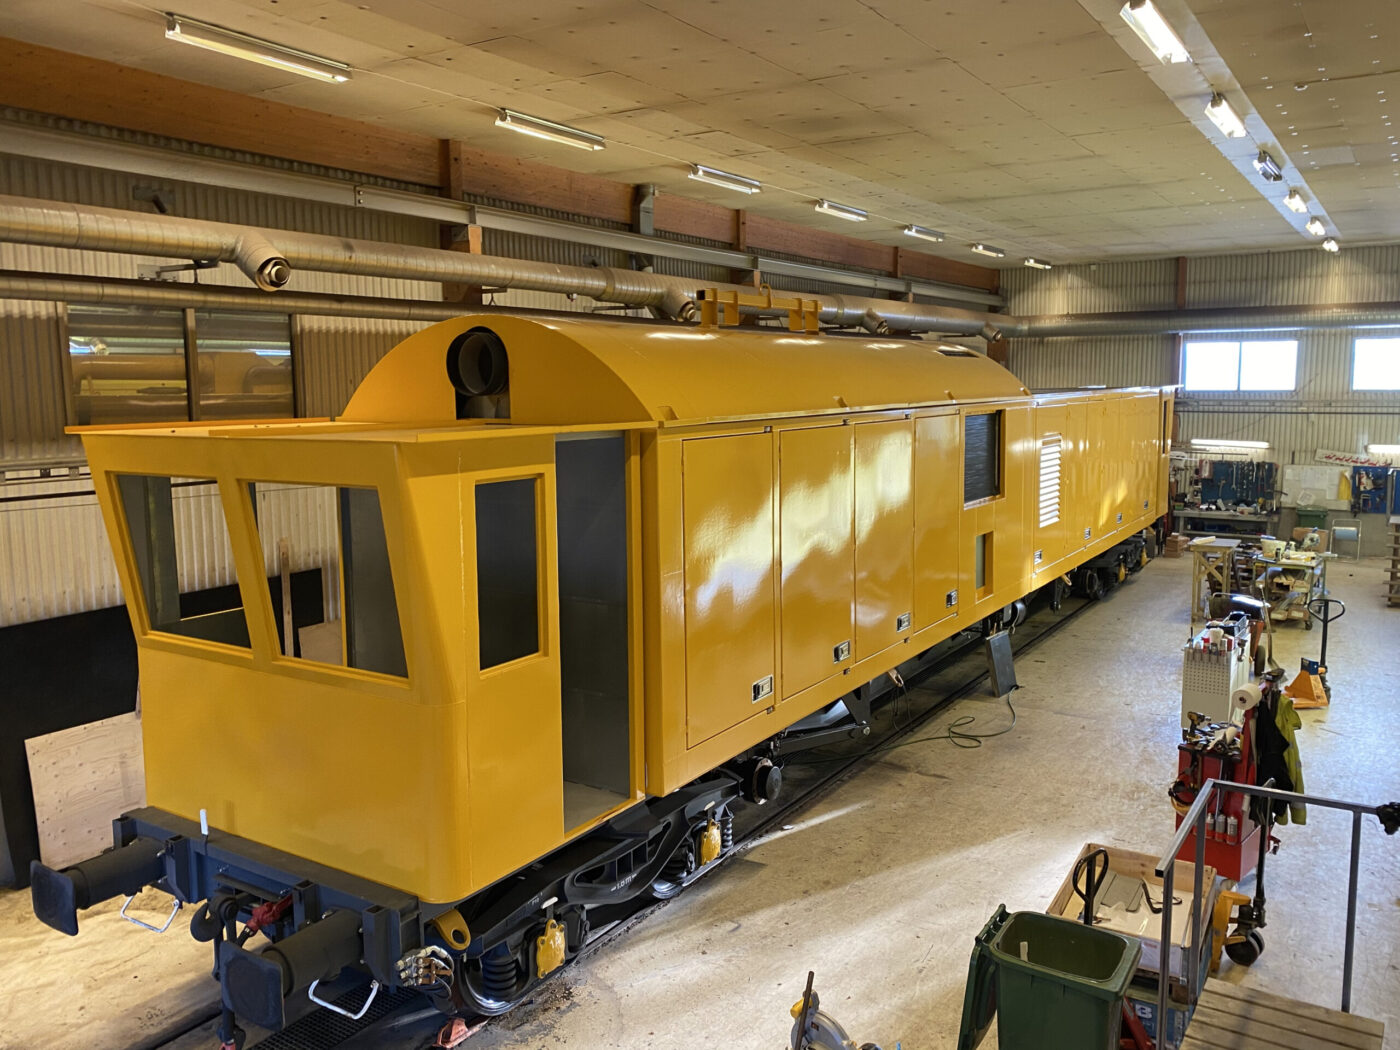 Railcare builds the world's largest battery-powered rail vehicle